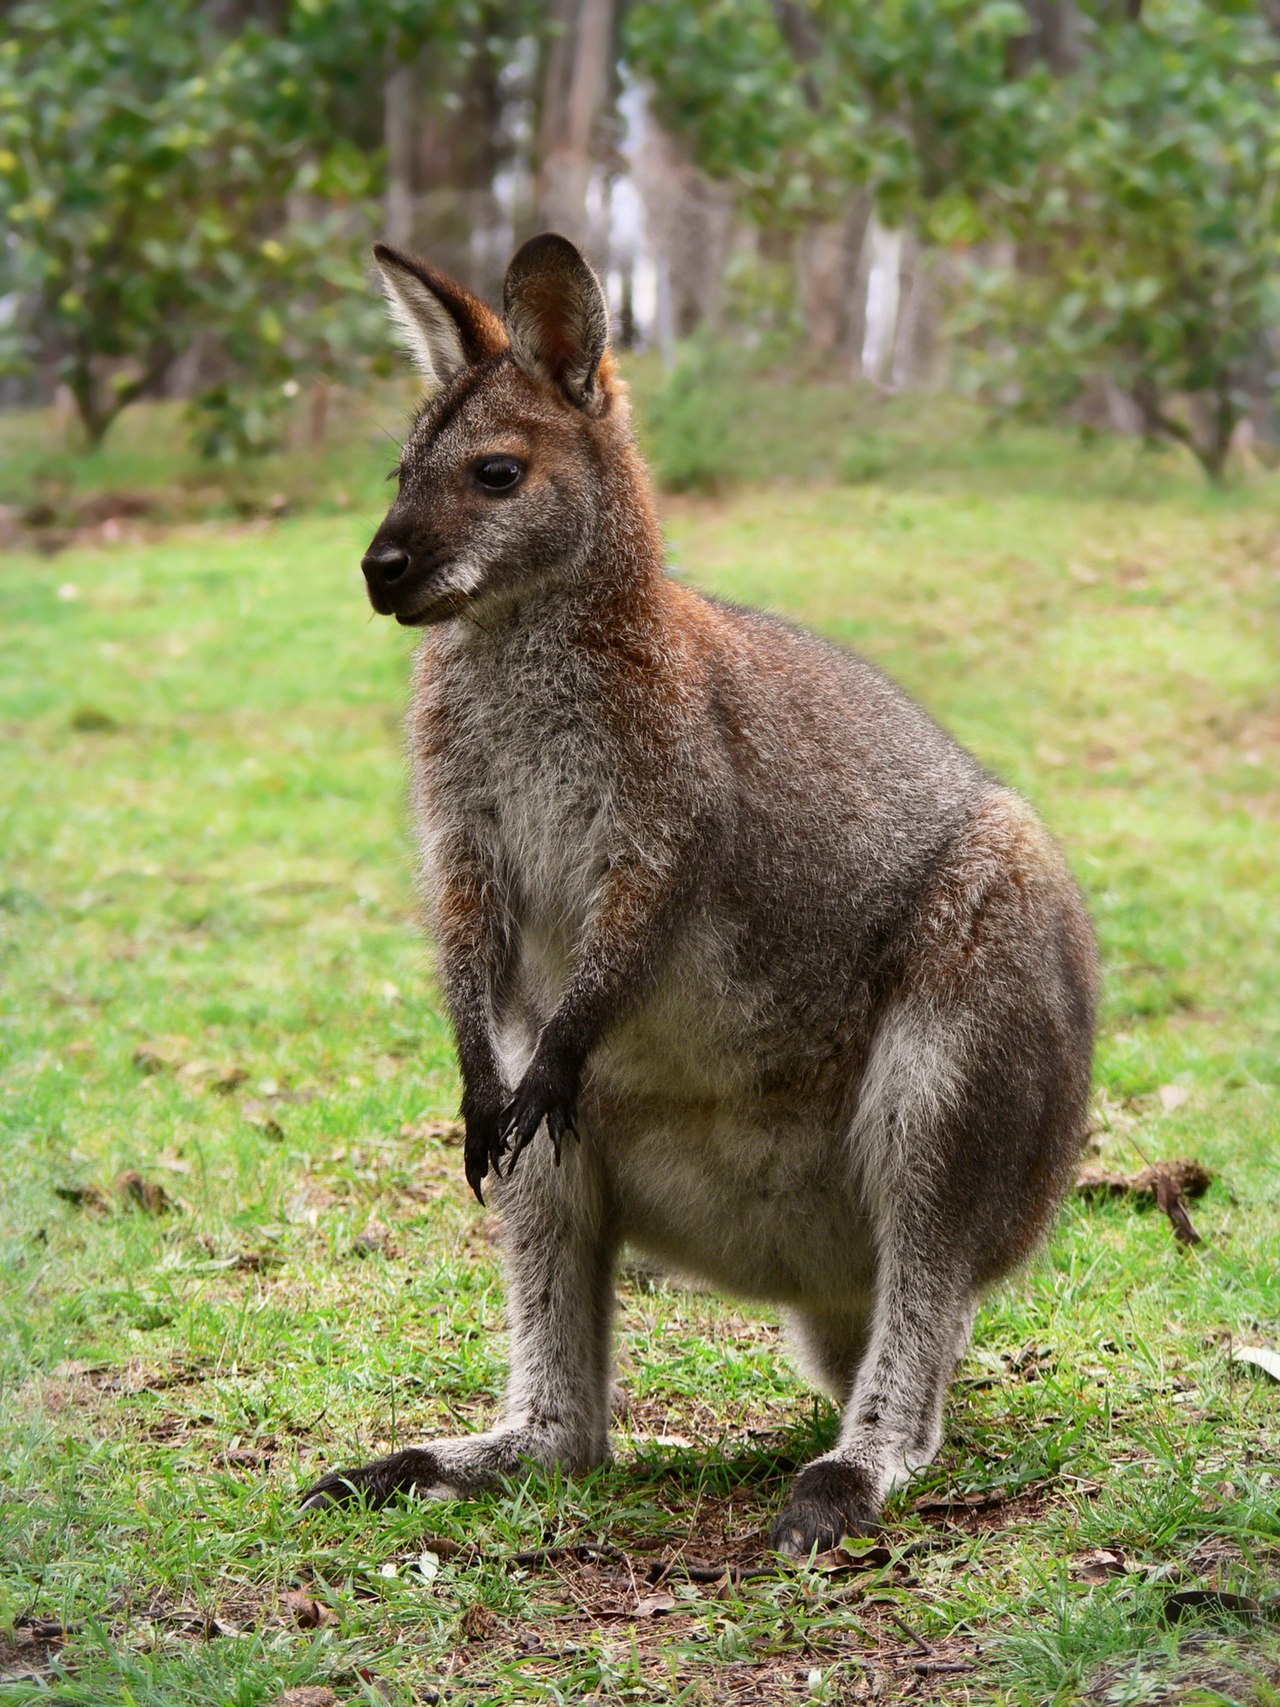 In Scotland, a wallaby escaped from the zoo and came to the pub - Wallaby, Kangaroo, Wild animals, Scotland, Contact zoo, Interesting, The escape